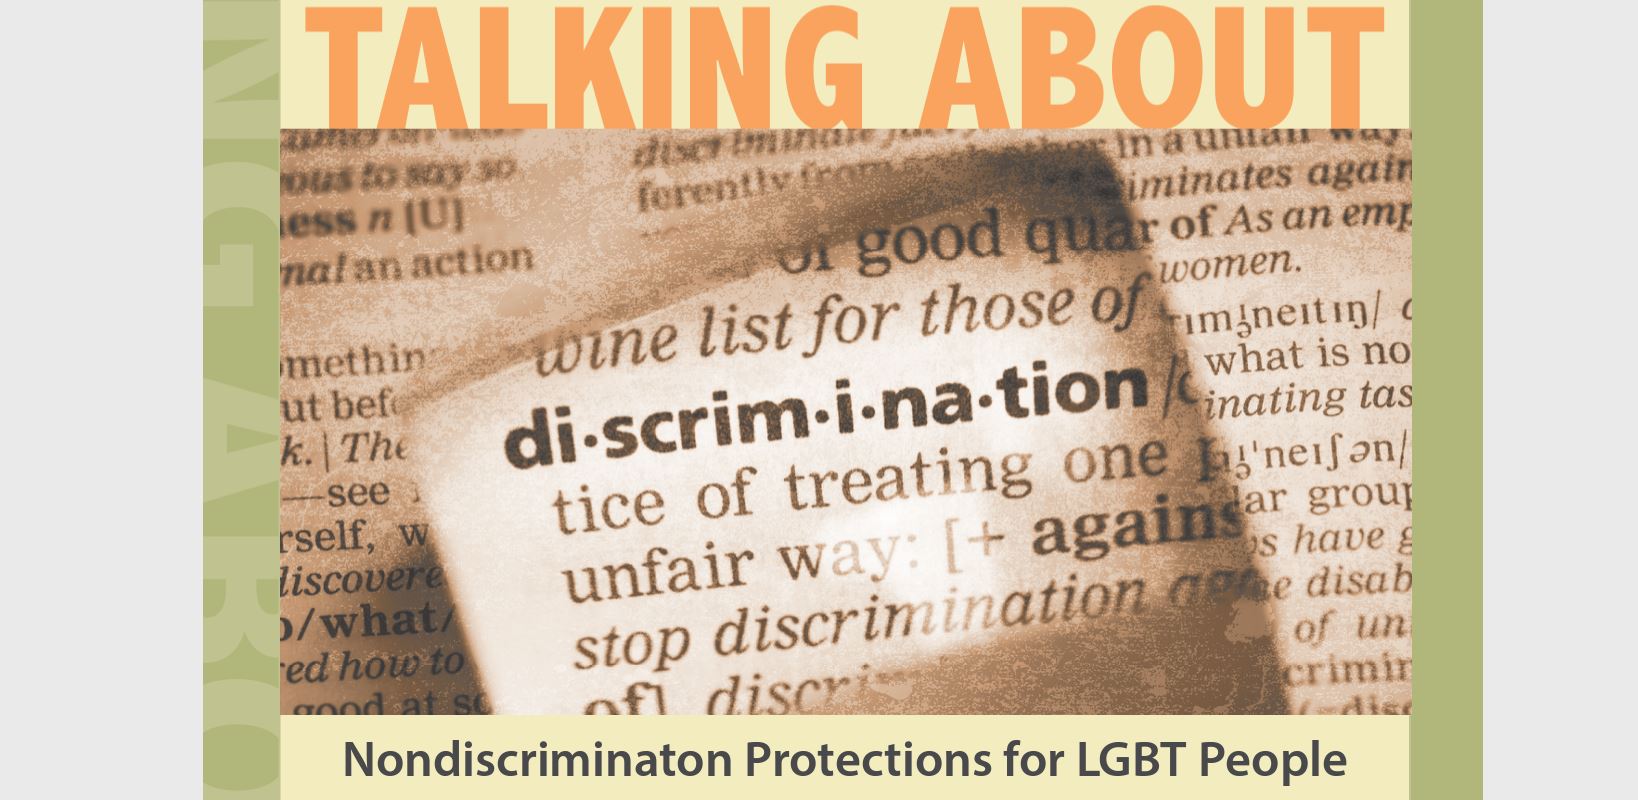 Talking About Nondiscrimination Protections for LGBT People (English)